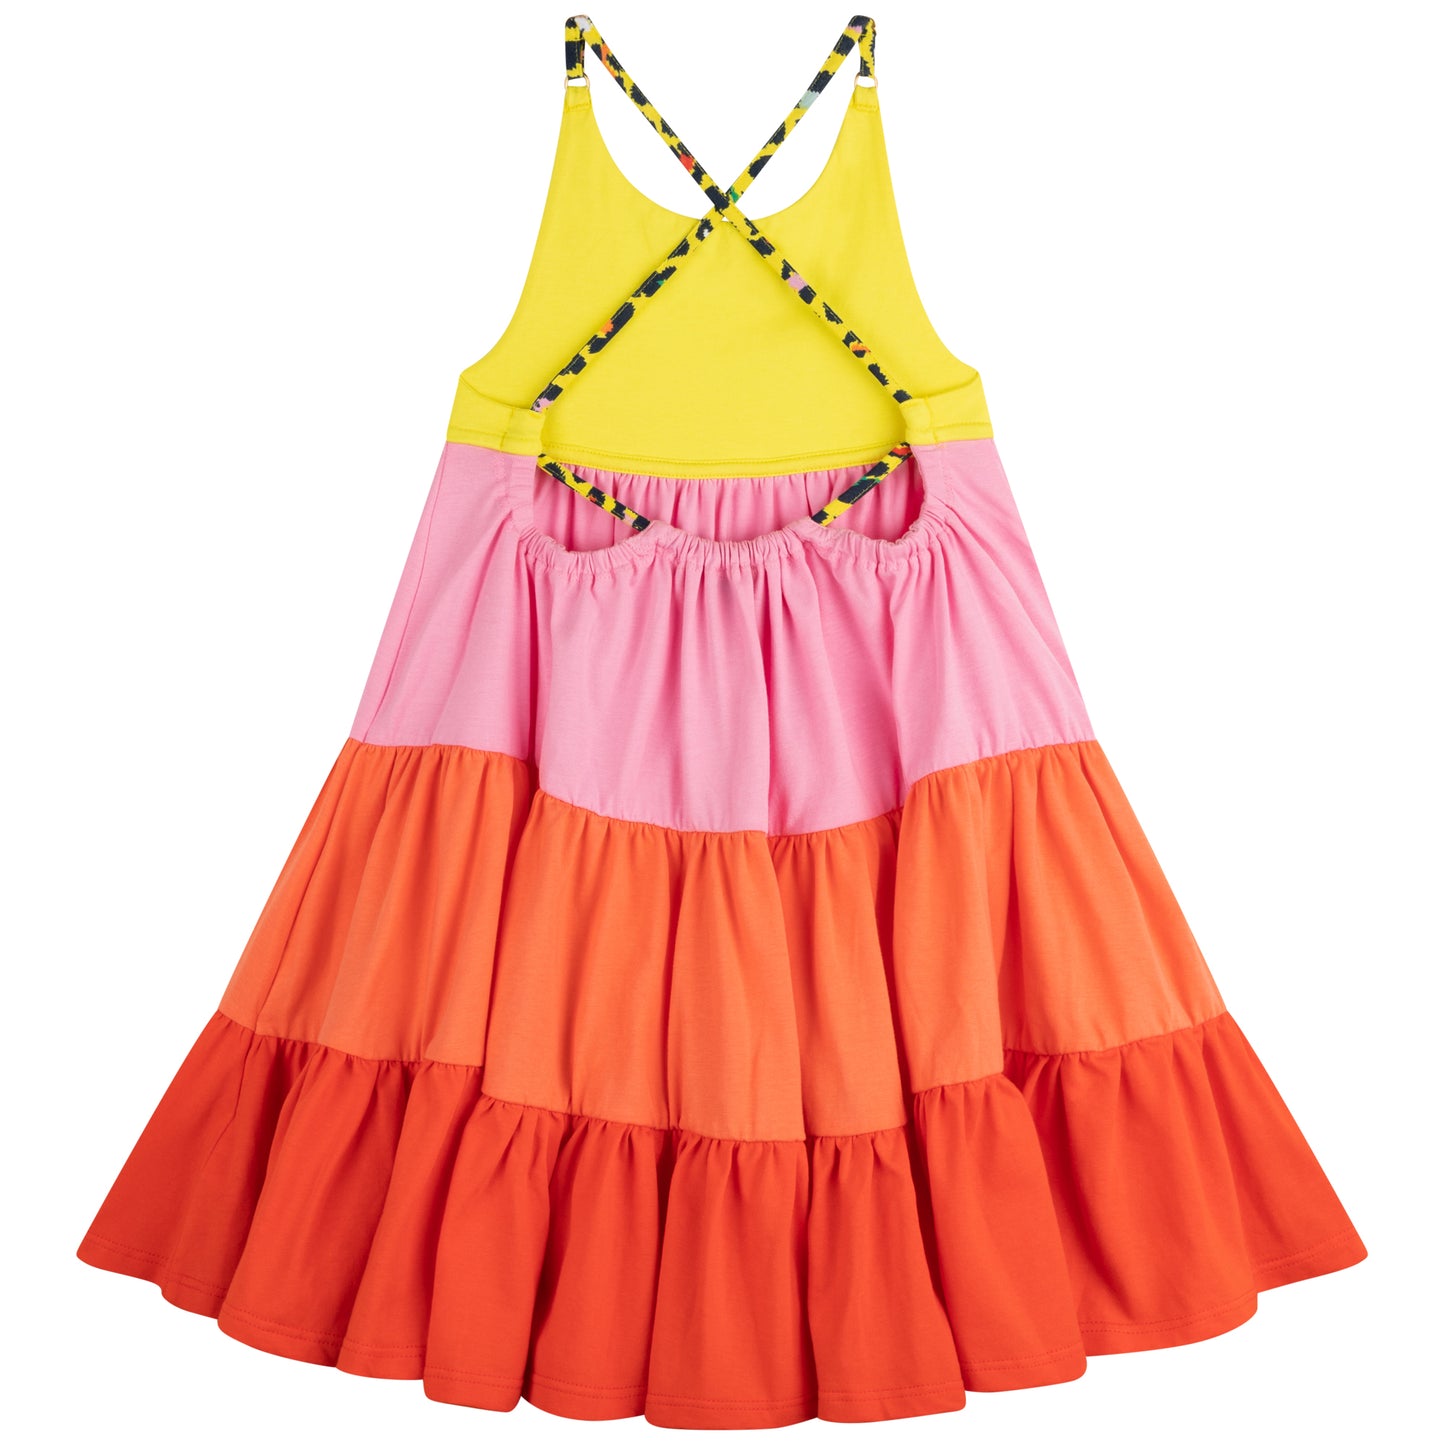 The Marc Jacobs Color Block Sleeveless Dress